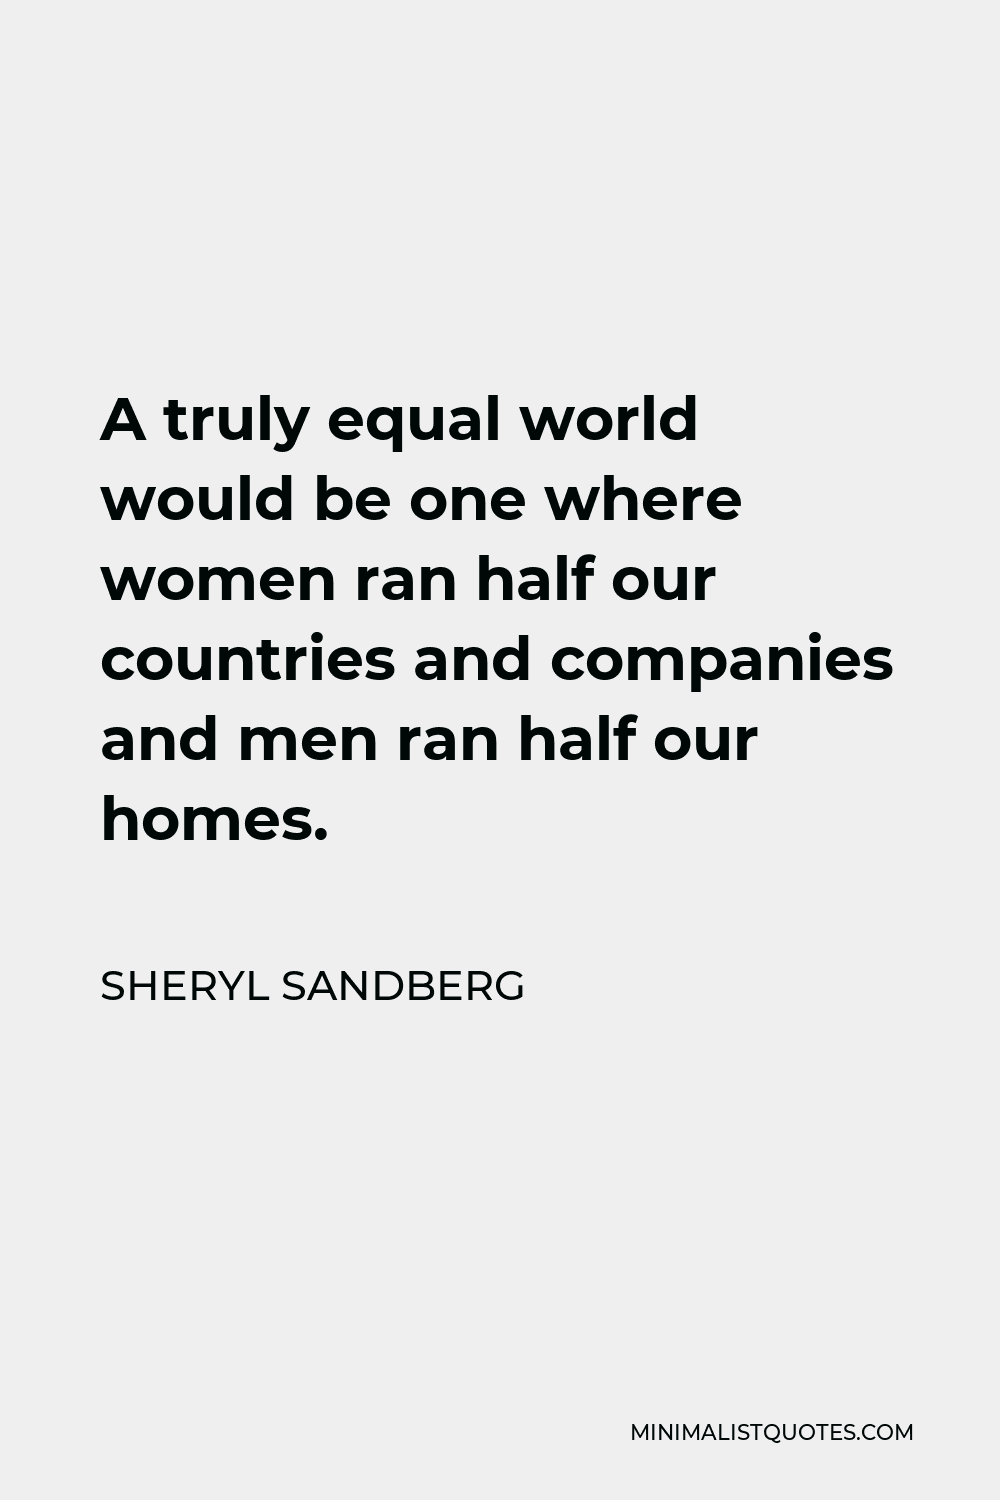 Sheryl Sandberg Quote - A truly equal world would be one where women ran half our countries and companies and men ran half our homes.